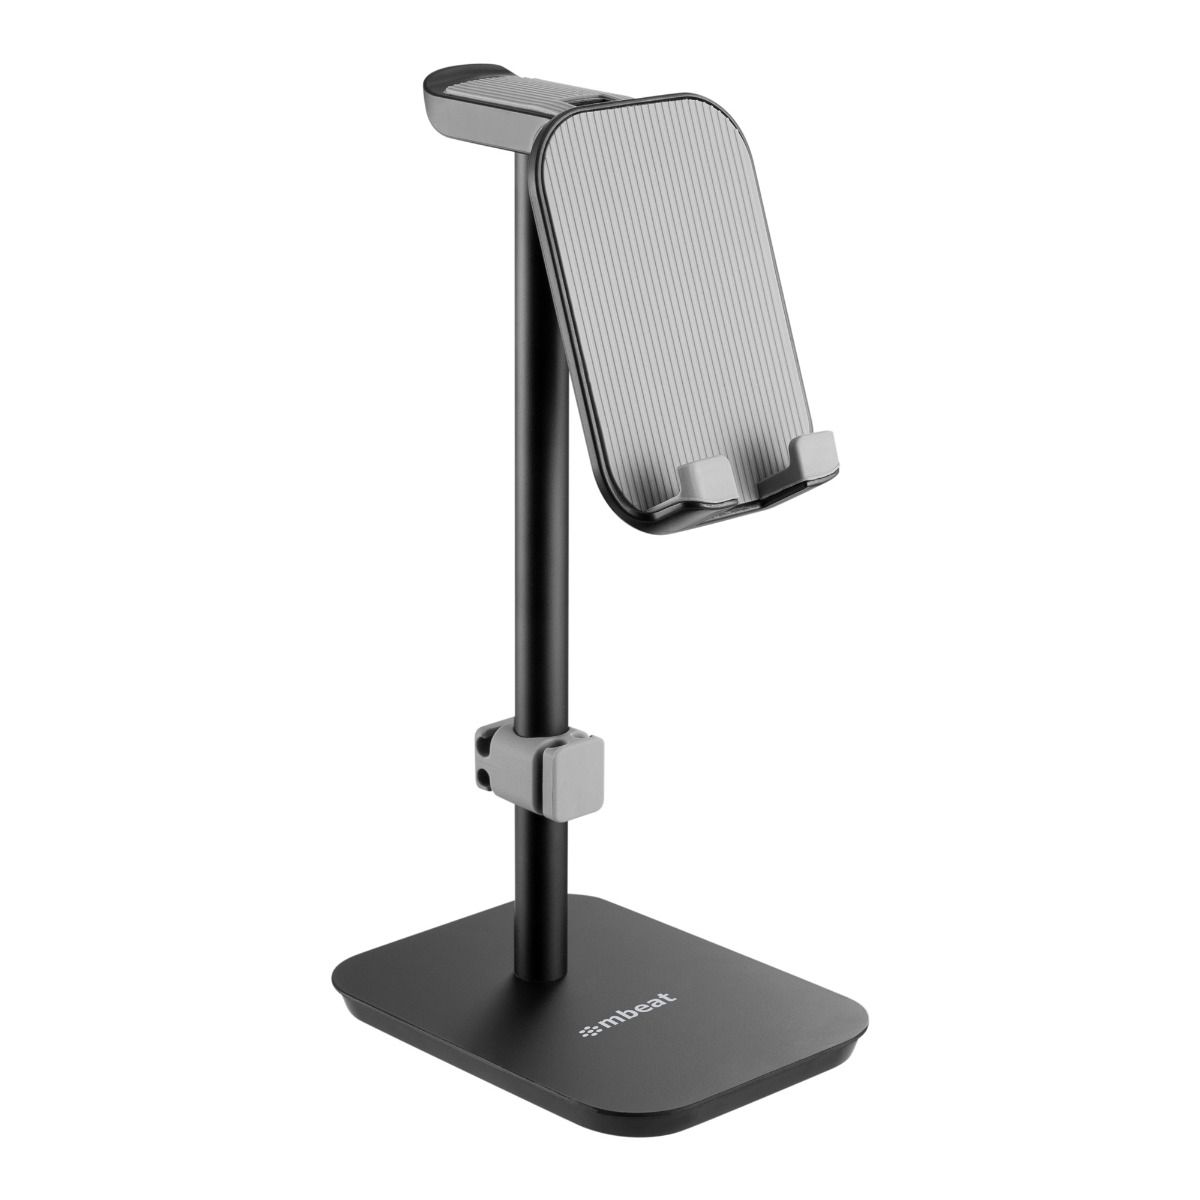 mbeat Stage S3 2-in-1 Headphone and Tiltable Phone Holder Stand